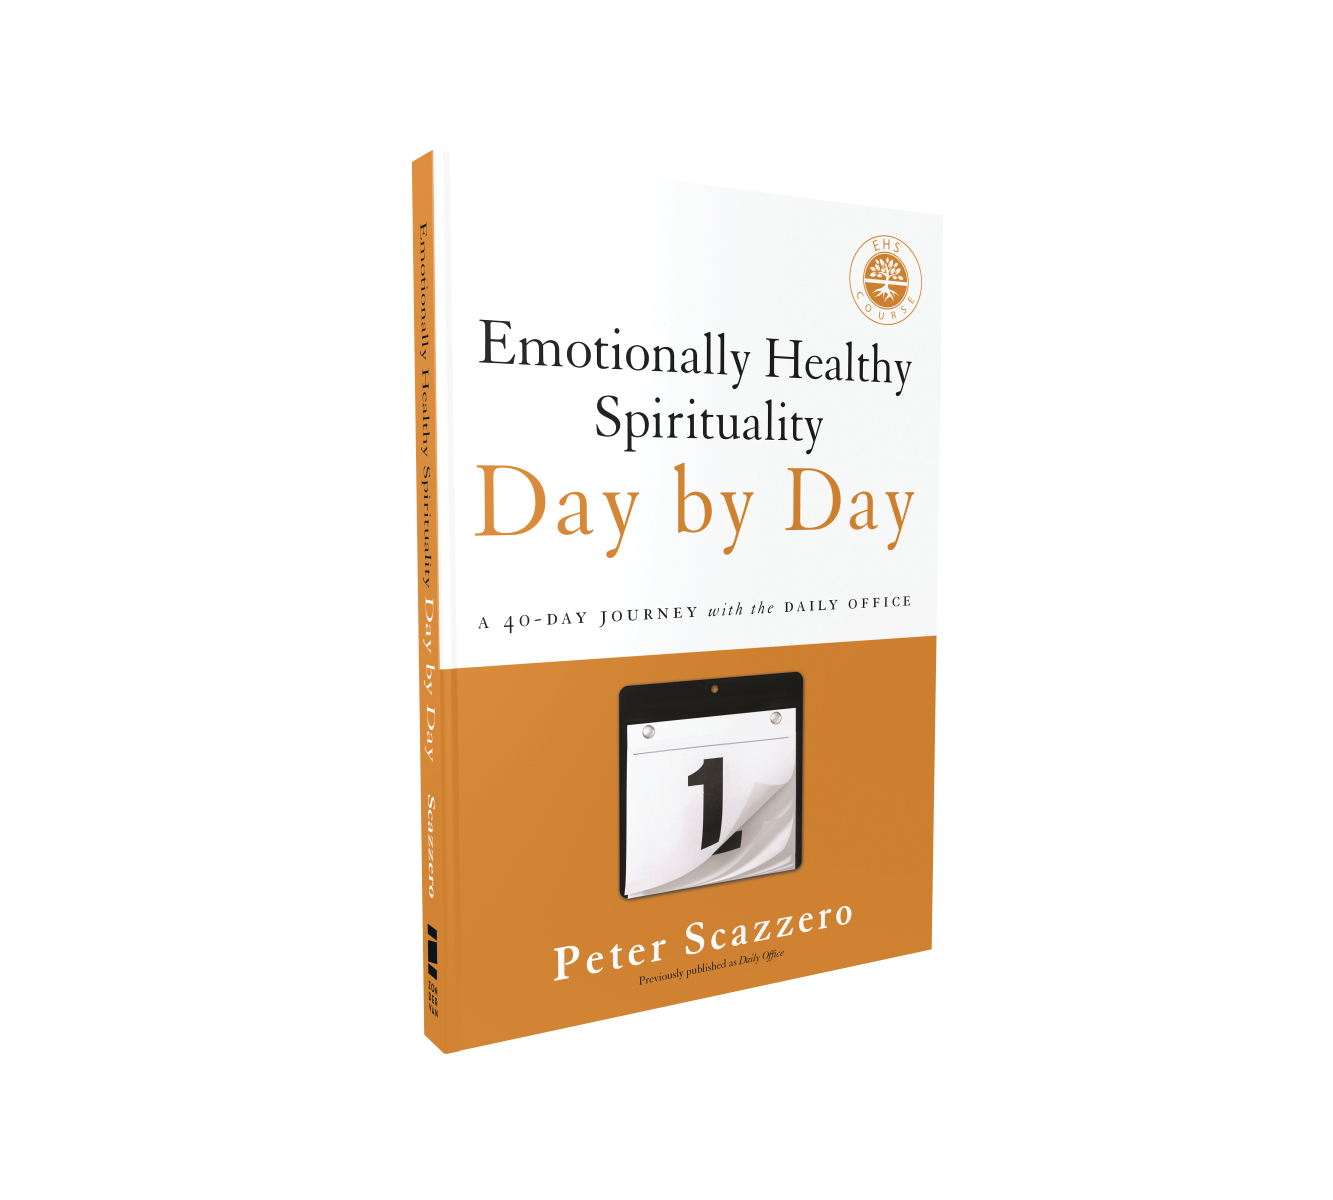 EH　by　Discipleship　Spirituality　Emotionally　Devotional　Day　Day　Healthy